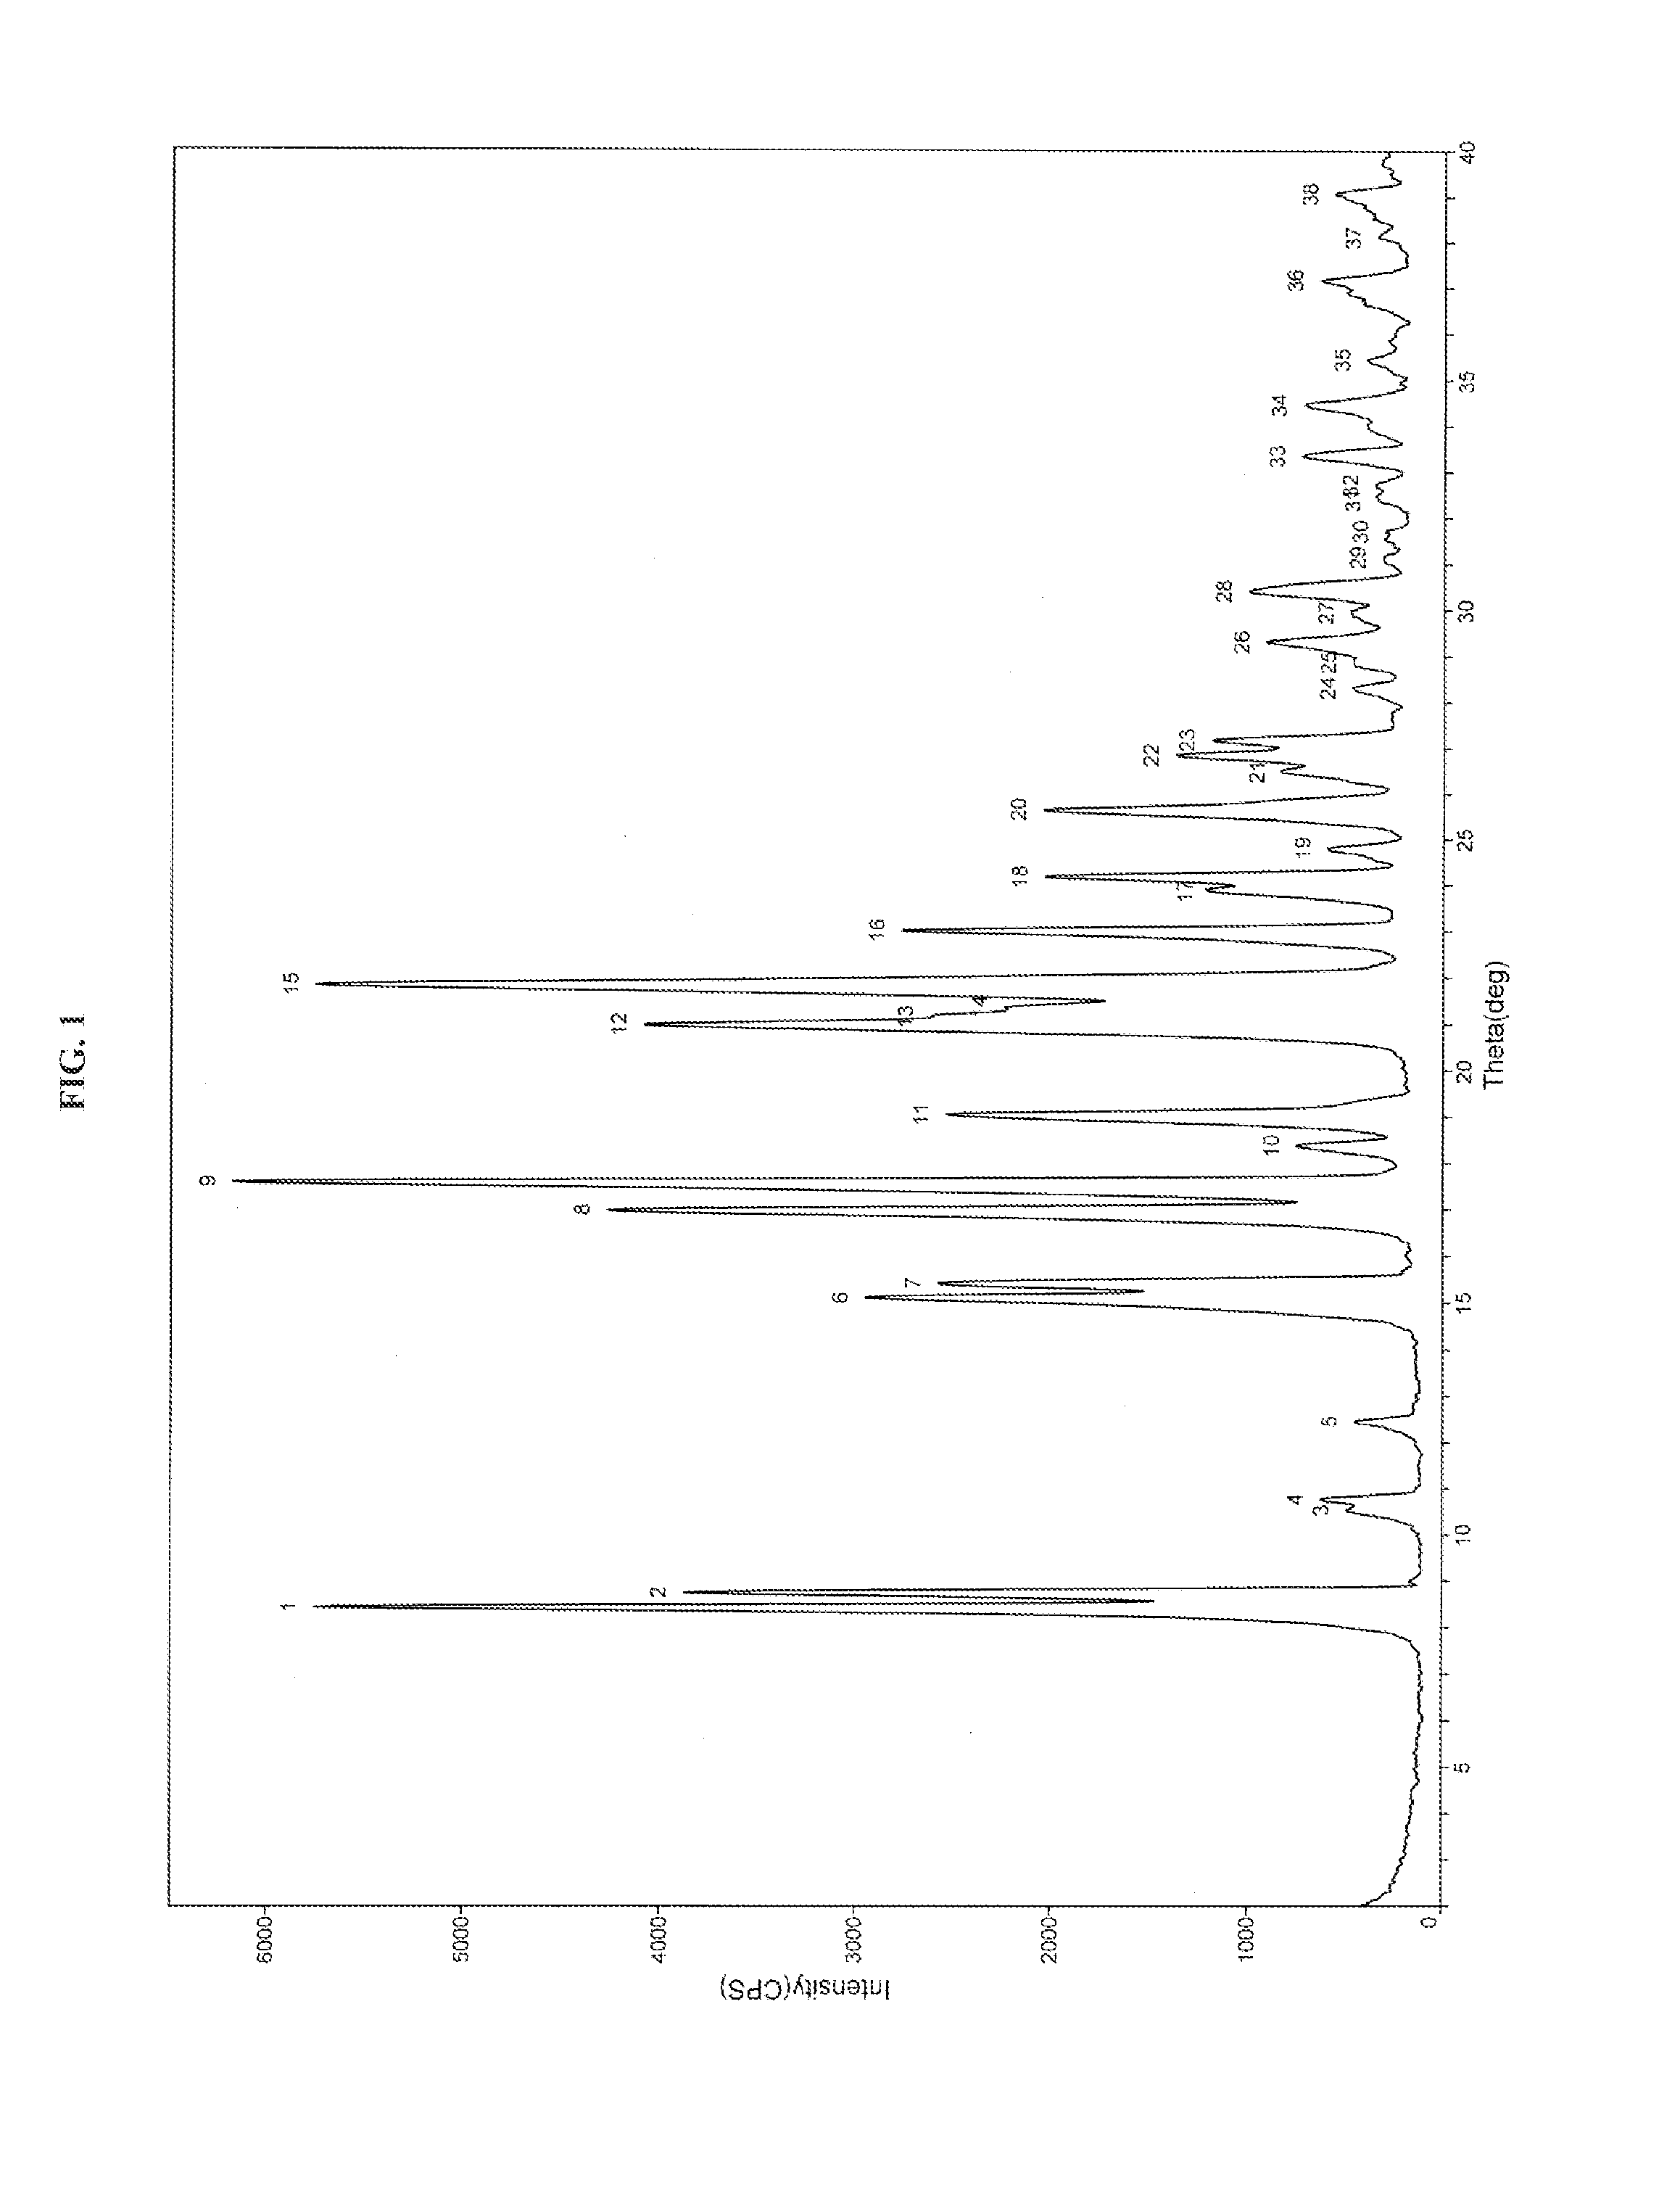 Process for the preparation of dabigatran etexilate mesylate and polymorphs of intermediates thereof